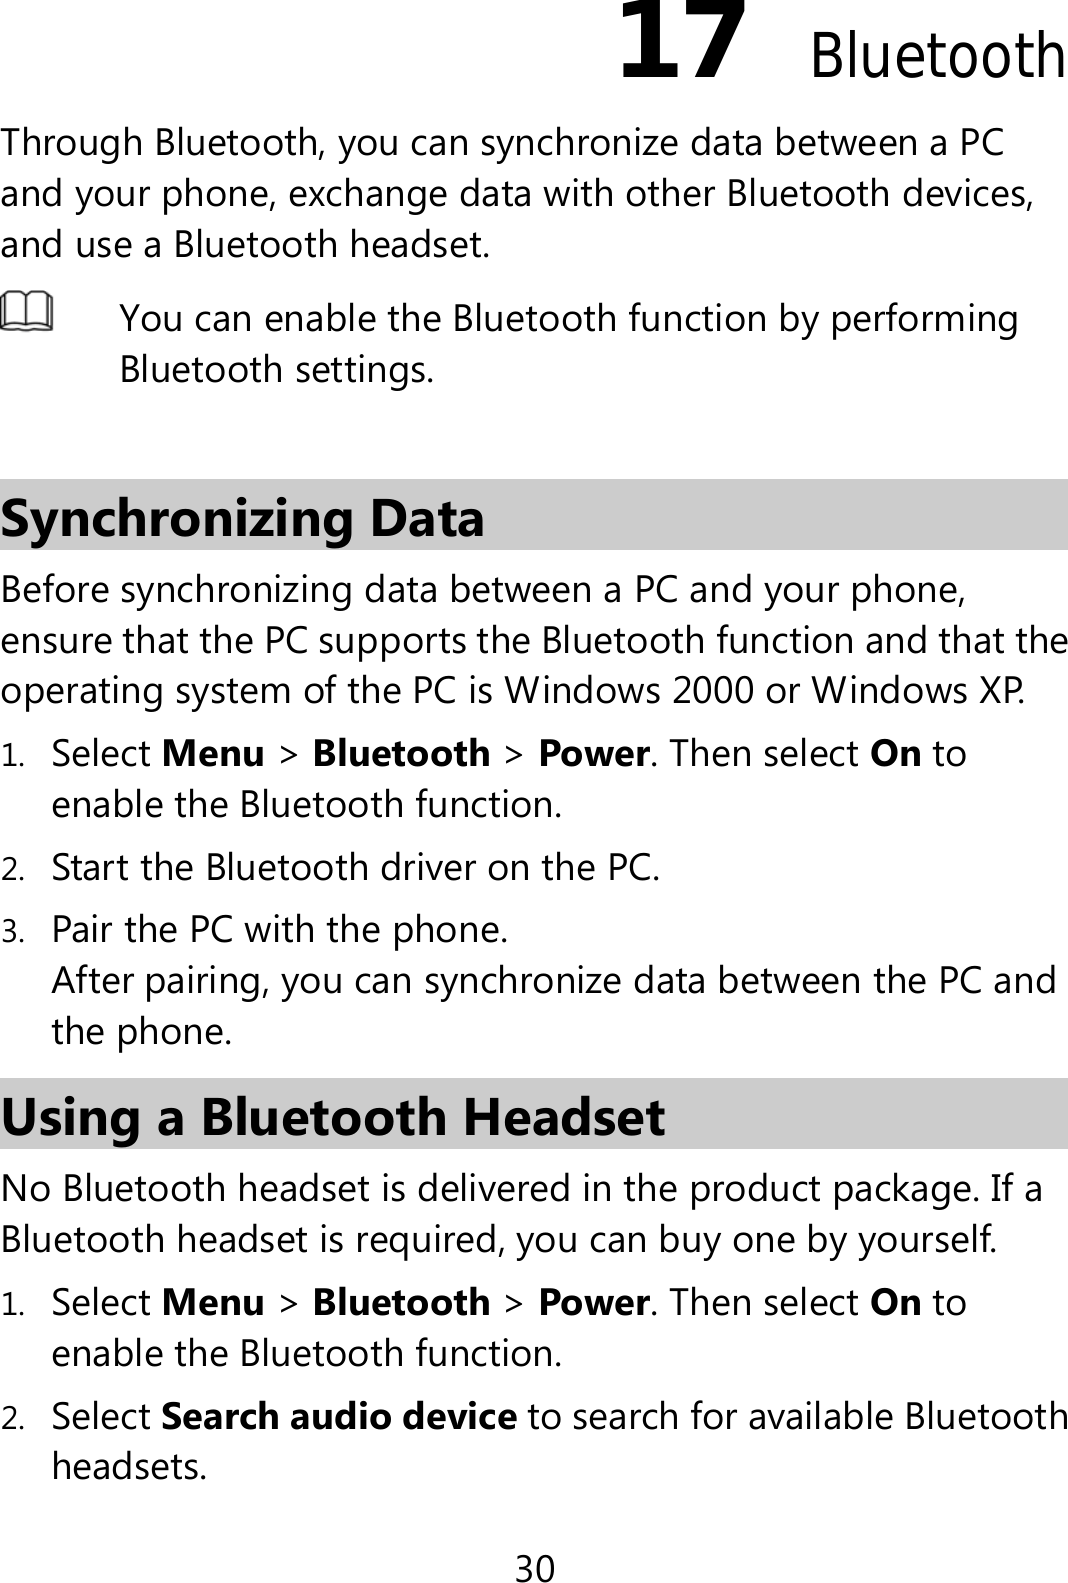 30 17  Bluetooth Through Bluetooth, you can synchronize data between a PC and your phone, exchange data with other Bluetooth devices, and use a Bluetooth headset.  You can enable the Bluetooth function by performing Bluetooth settings.    Synchronizing Data Before synchronizing data between a PC and your phone, ensure that the PC supports the Bluetooth function and that the operating system of the PC is Windows 2000 or Windows XP. 1. Select Menu &gt; Bluetooth &gt; Power. Then select On to enable the Bluetooth function. 2. Start the Bluetooth driver on the PC. 3. Pair the PC with the phone. After pairing, you can synchronize data between the PC and the phone. Using a Bluetooth Headset   No Bluetooth headset is delivered in the product package. If a Bluetooth headset is required, you can buy one by yourself. 1. Select Menu &gt; Bluetooth &gt; Power. Then select On to enable the Bluetooth function. 2. Select Search audio device to search for available Bluetooth headsets. 